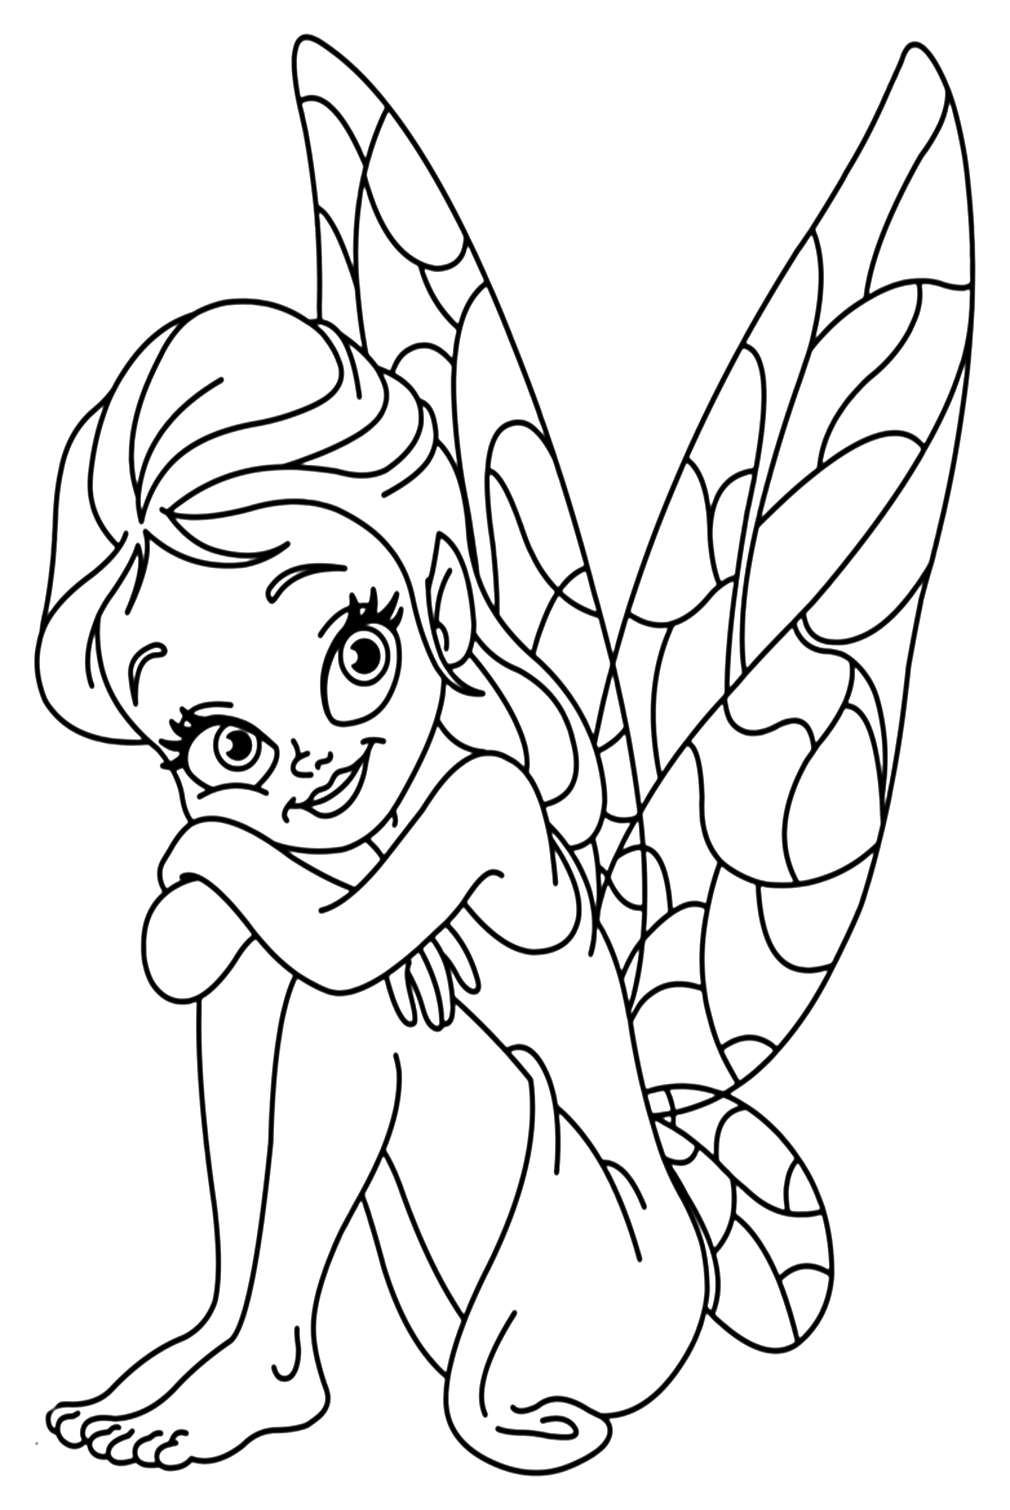 Fairy to Color Coloring Page